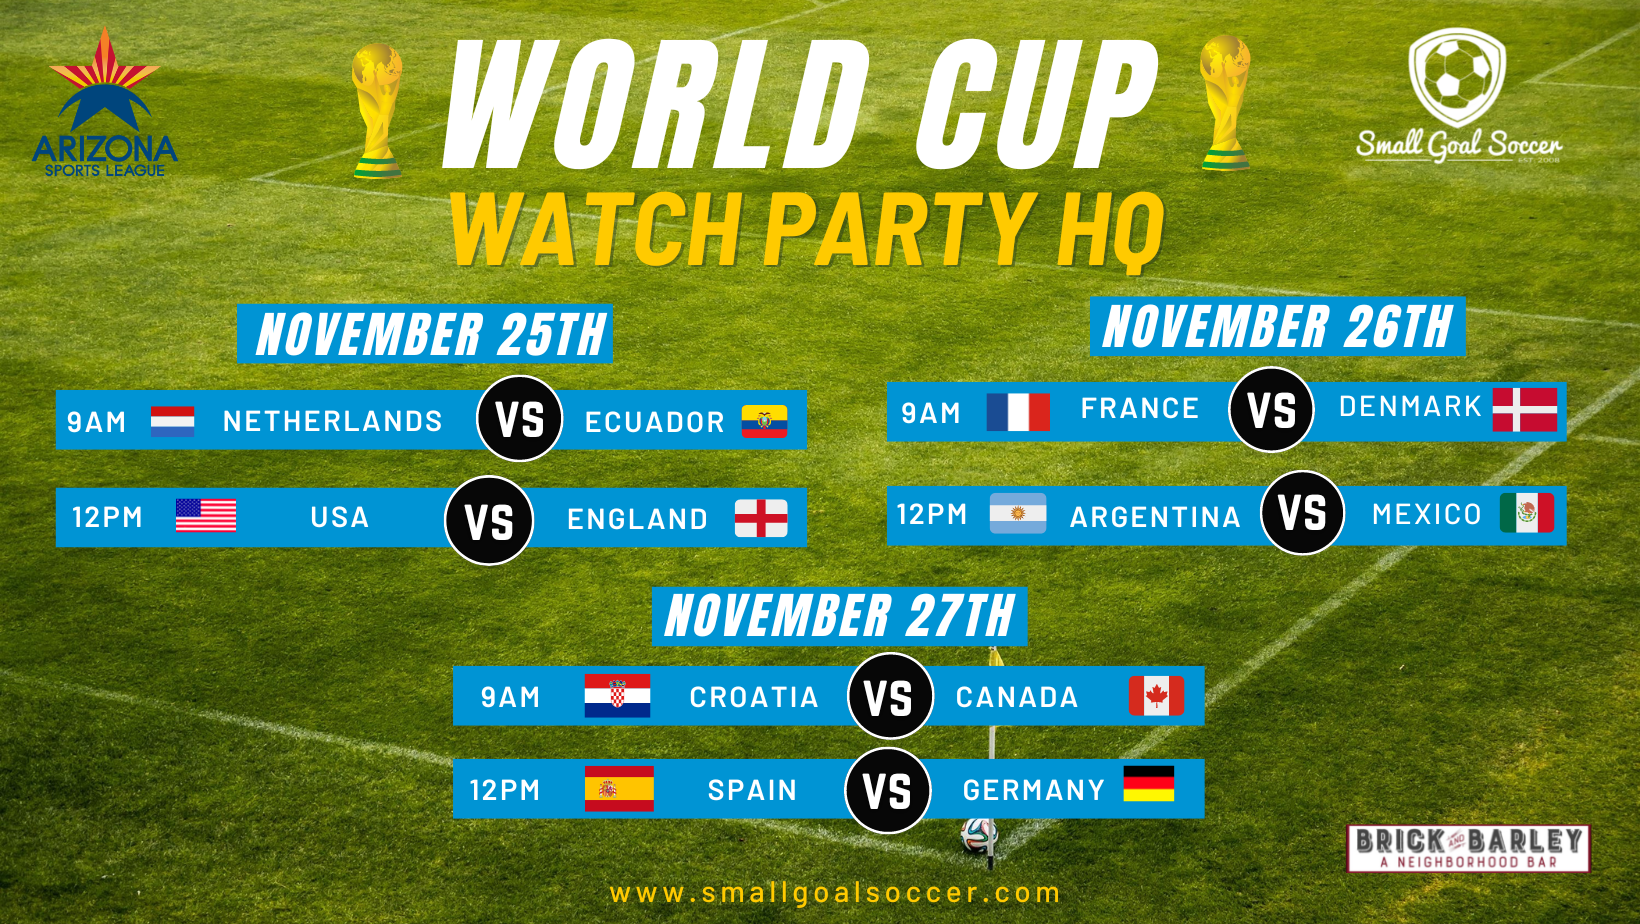 Free World Cup Watch Party Headquarters - AZ Sports League and Small Goal Soccer